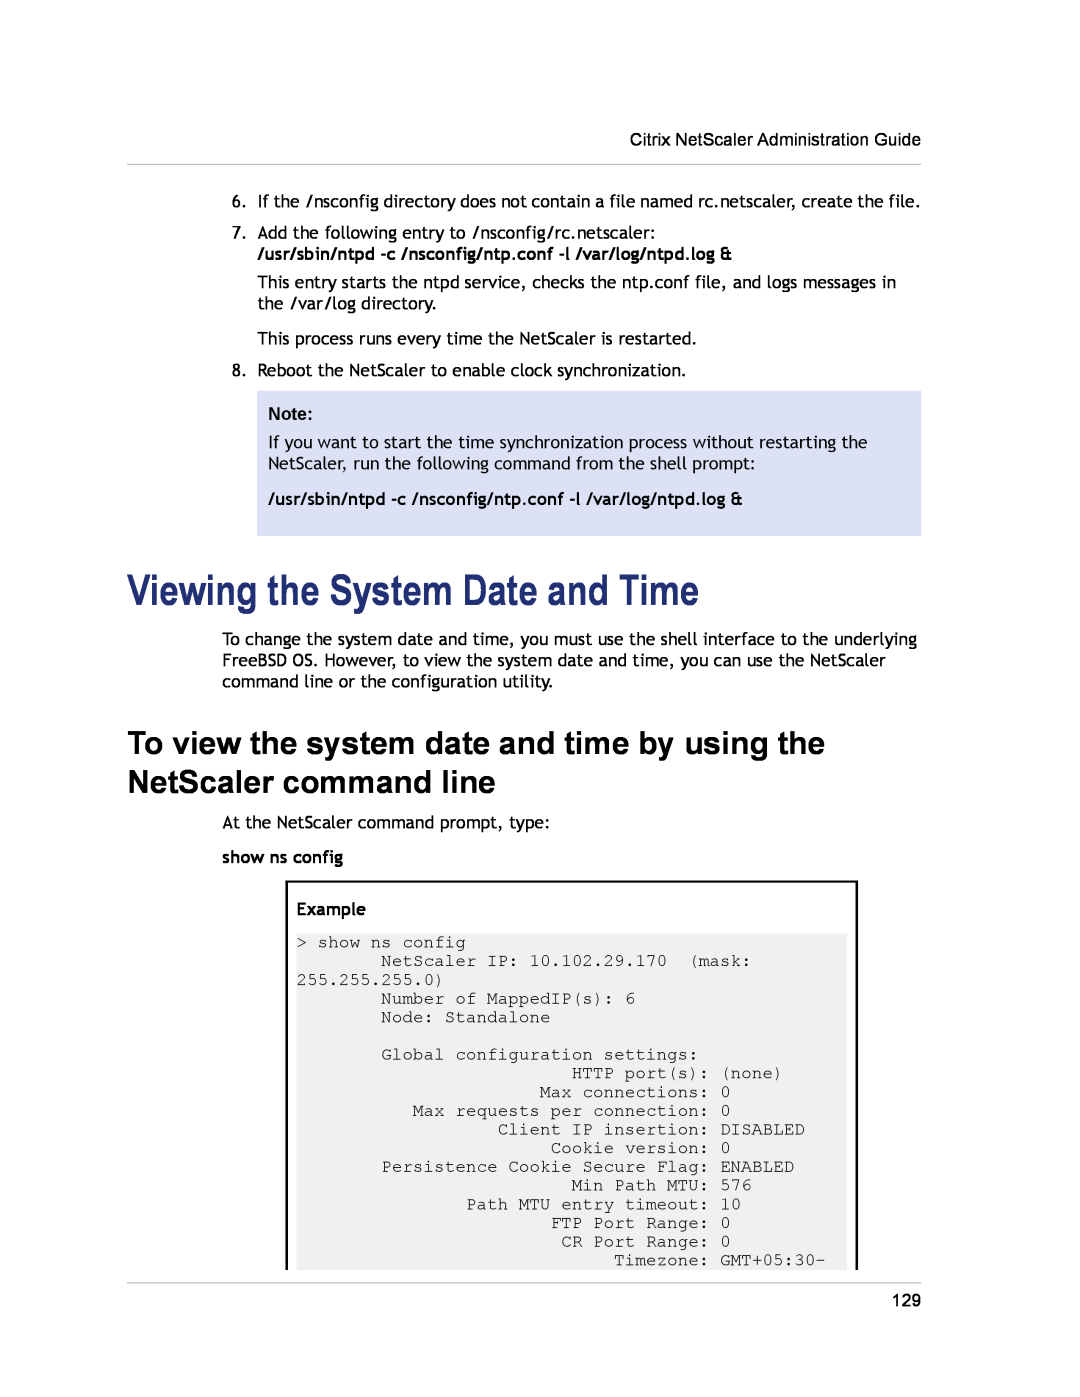 Citrix Systems CITRIX NETSCALER 9.3 manual Viewing the System Date and Time, show ns config Example 